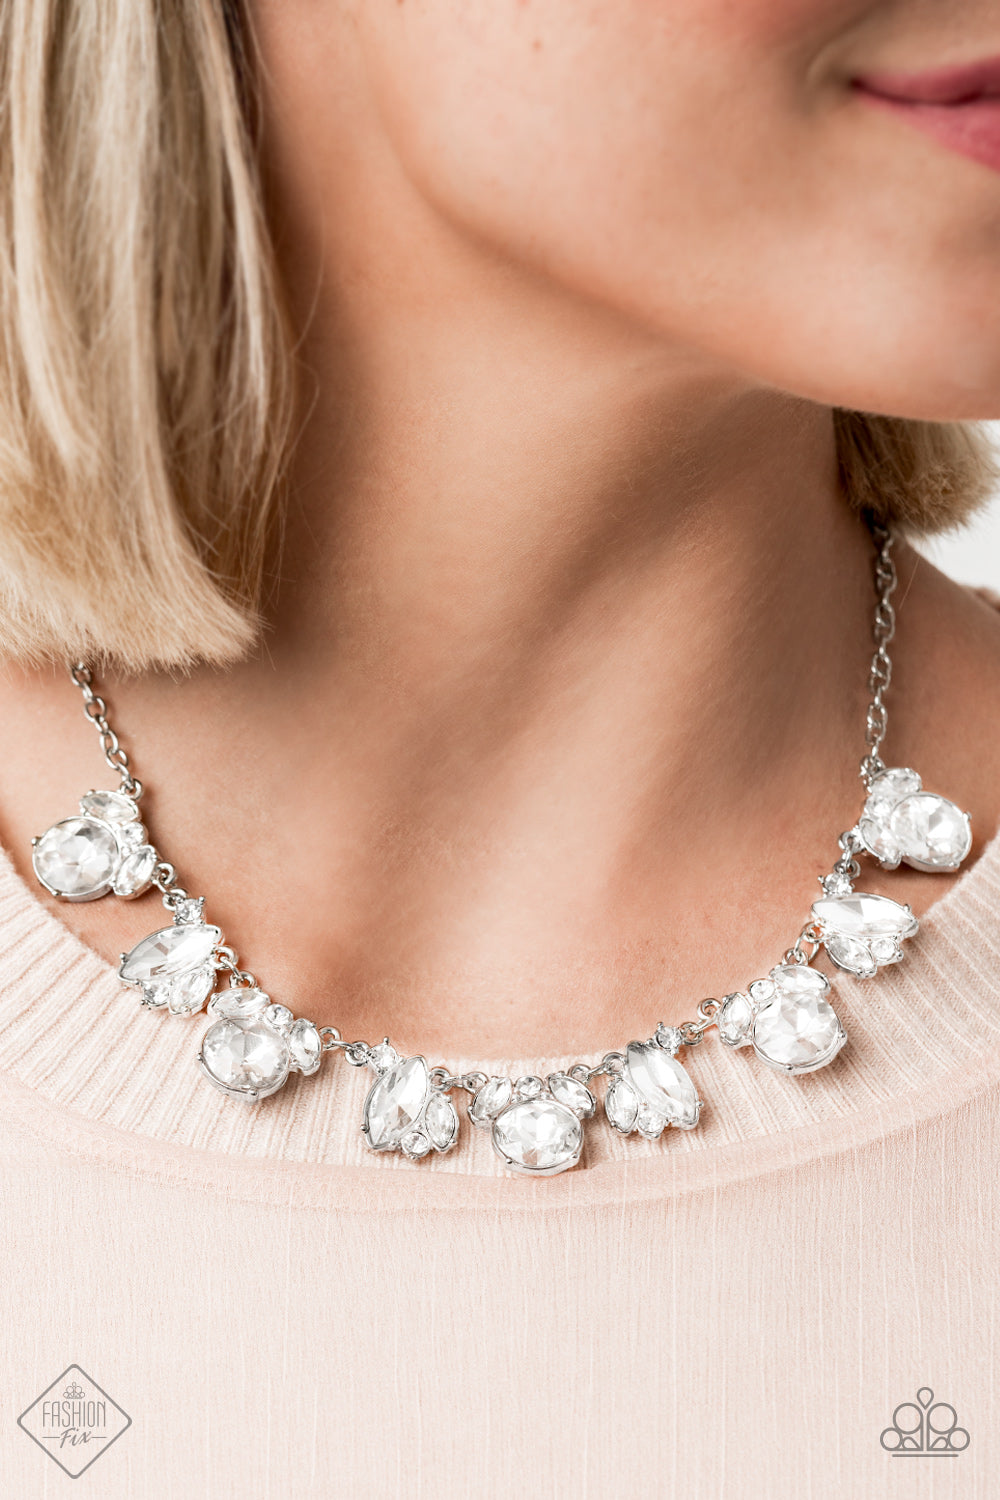 Paparazzi BLING to Attention White Short Necklace Necklace - Fashion Fix Fiercely 5th Avenue September 2020